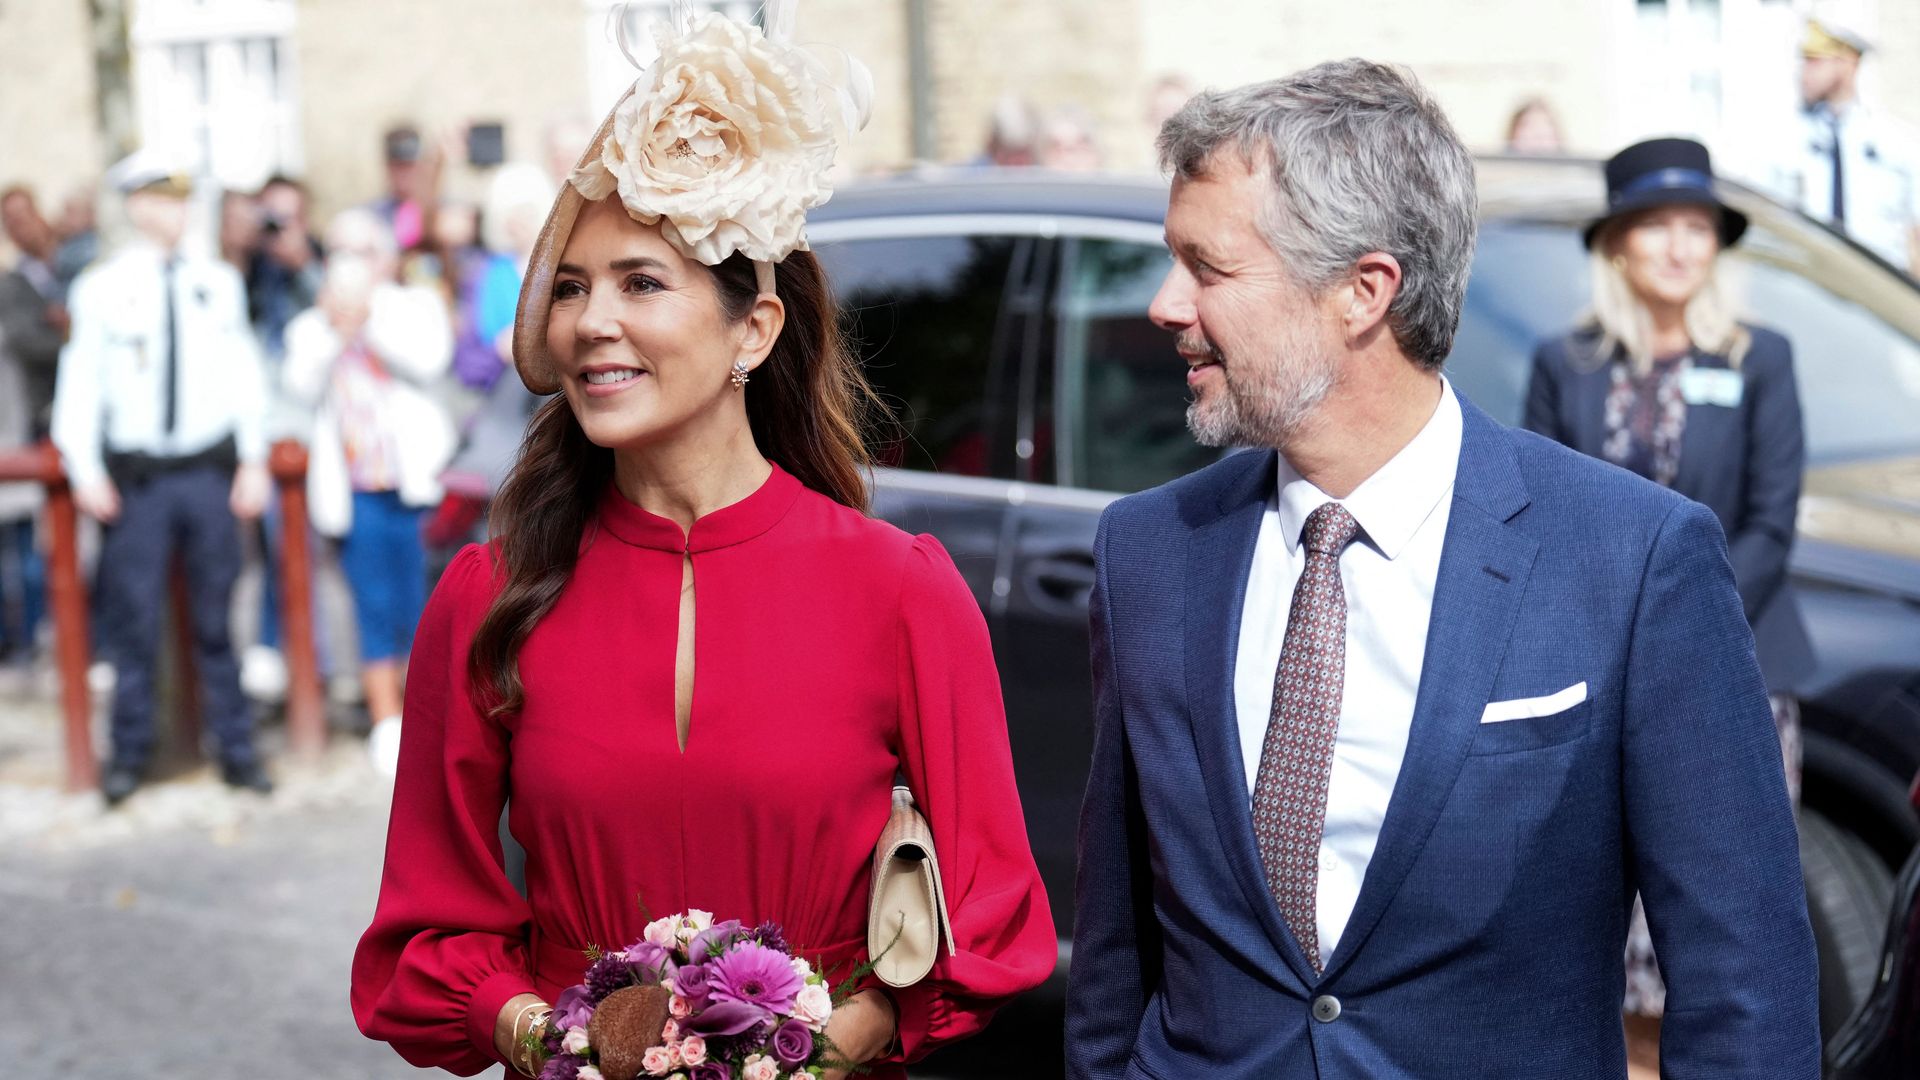 Denmark's Crown Prince Frederik and Denmark's Crown Princess Mary arrive to participate in the celebration of Christiansfeld's 250th anniversary